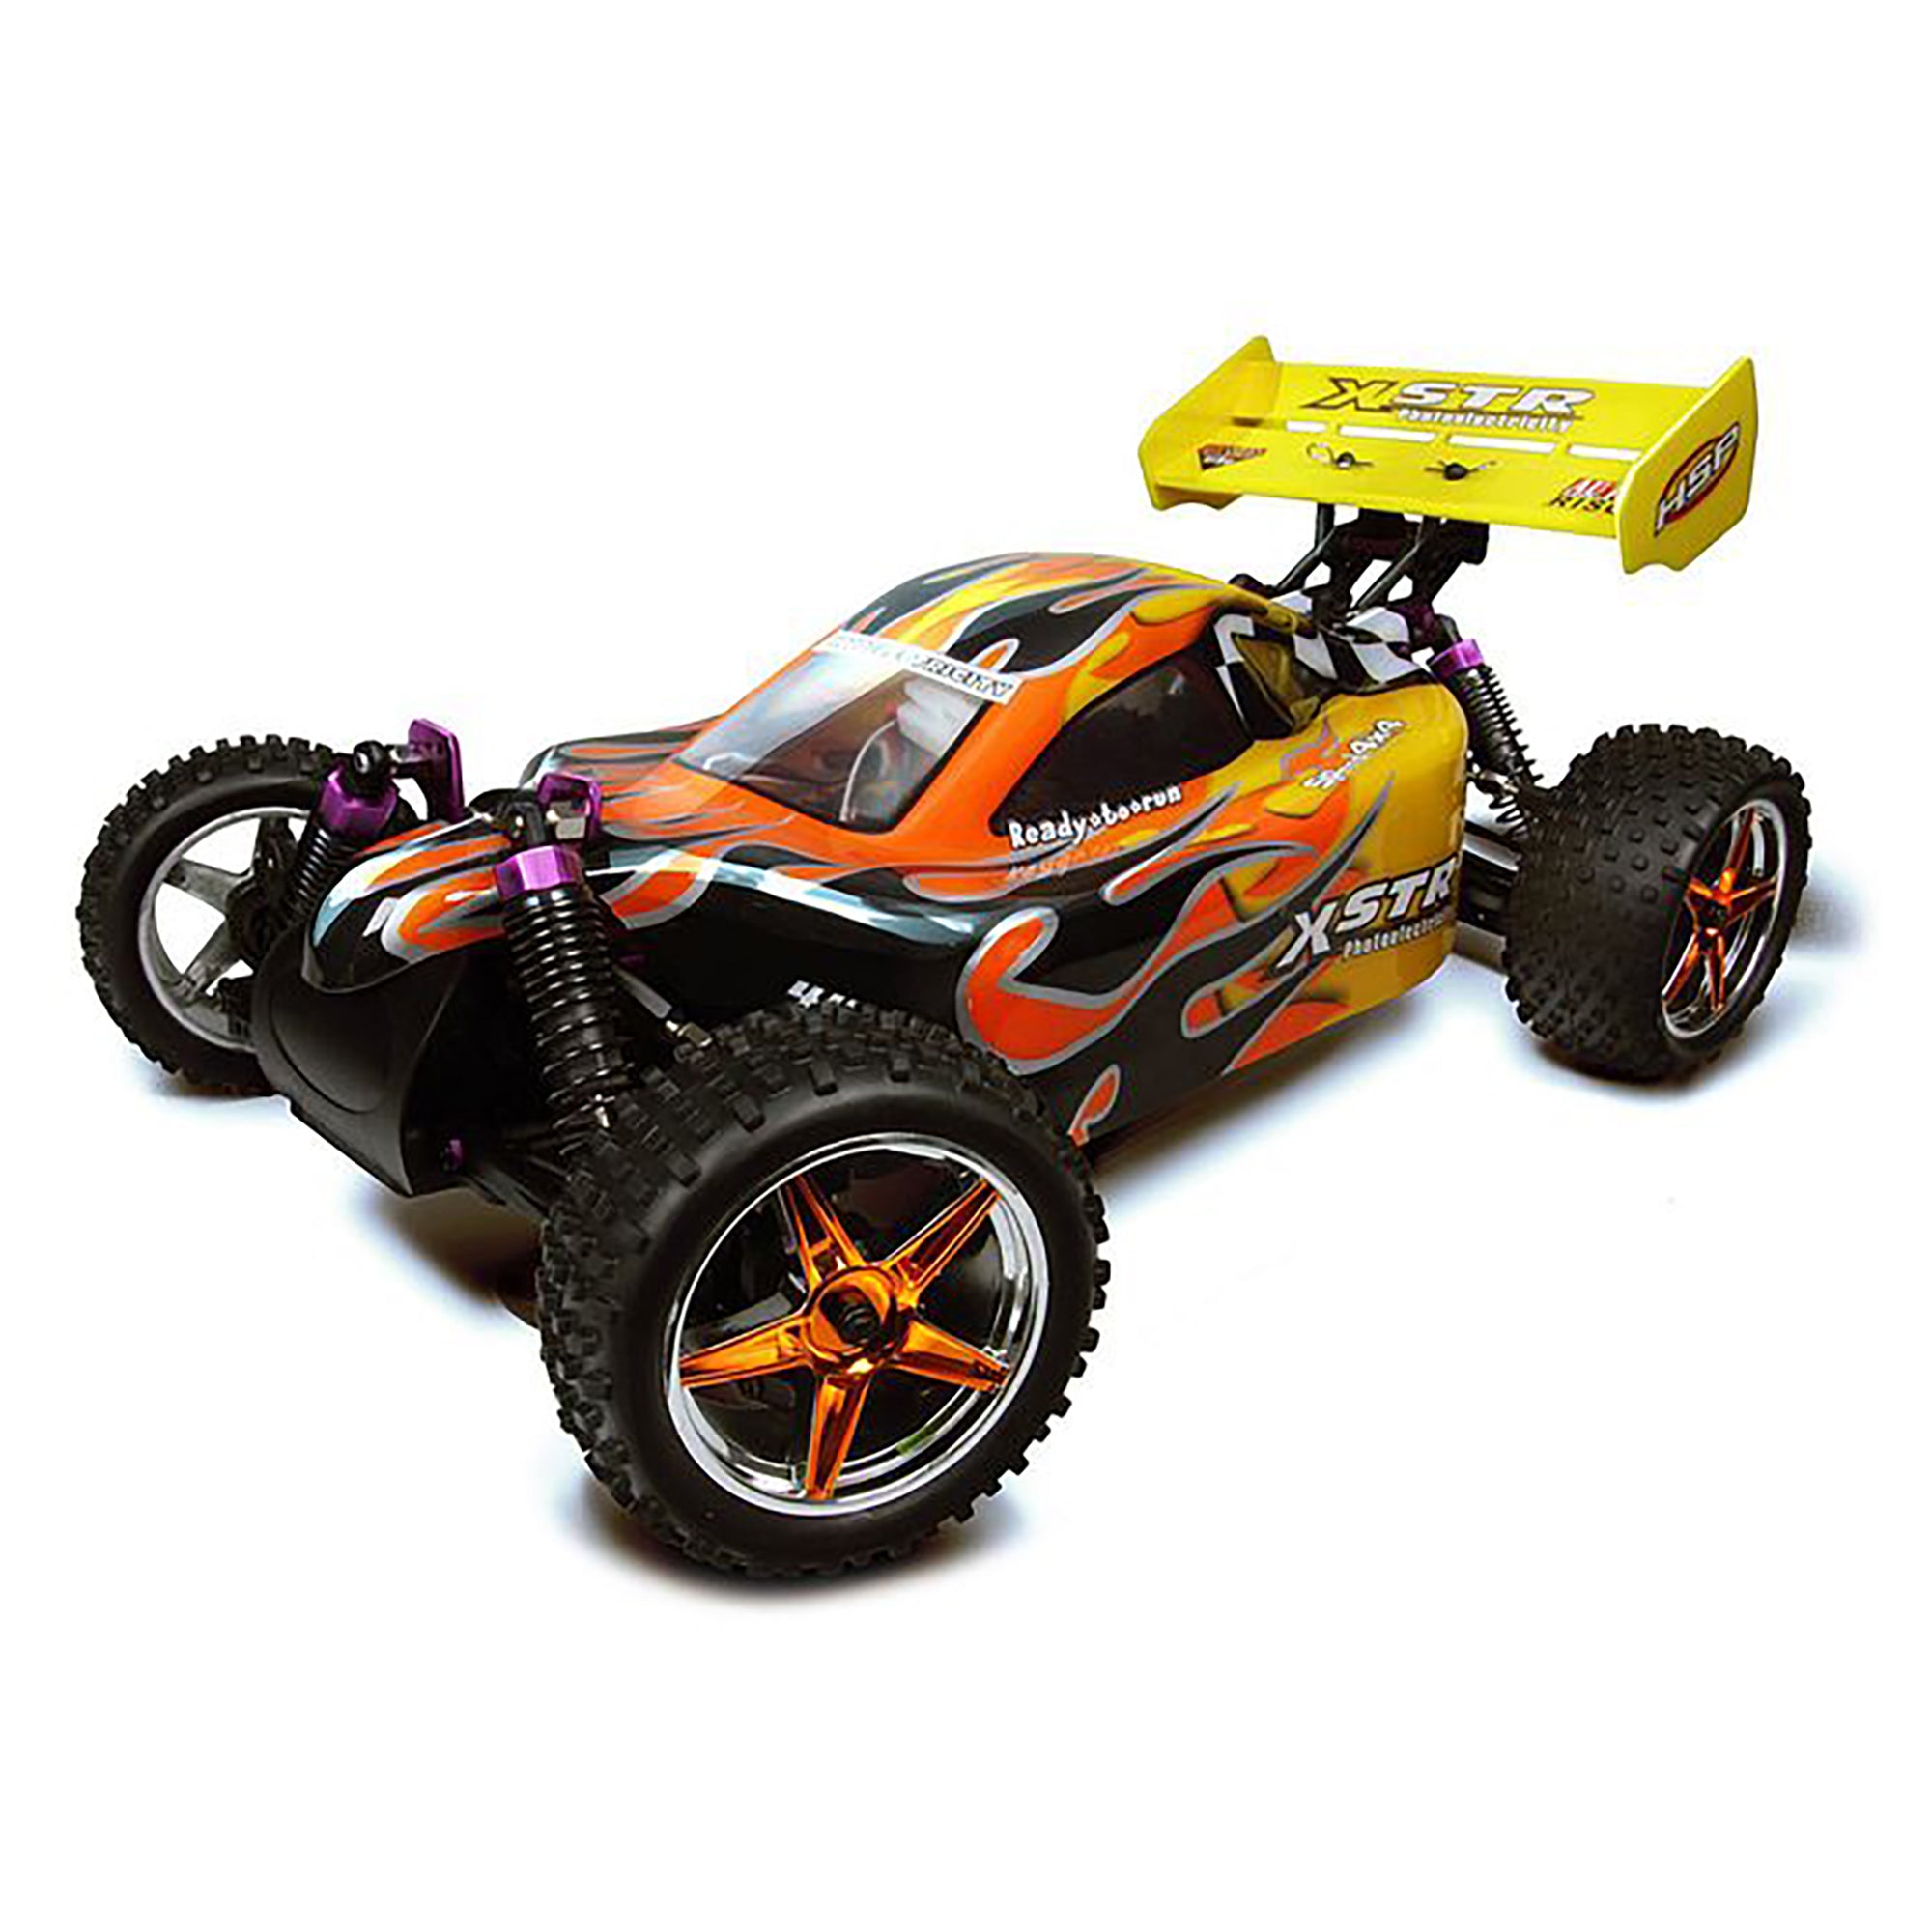 HSP Racing 94107-66001 Orange 2.4Ghz Electric 4WD Off Road RTR 1/10 Scale RC Buggy